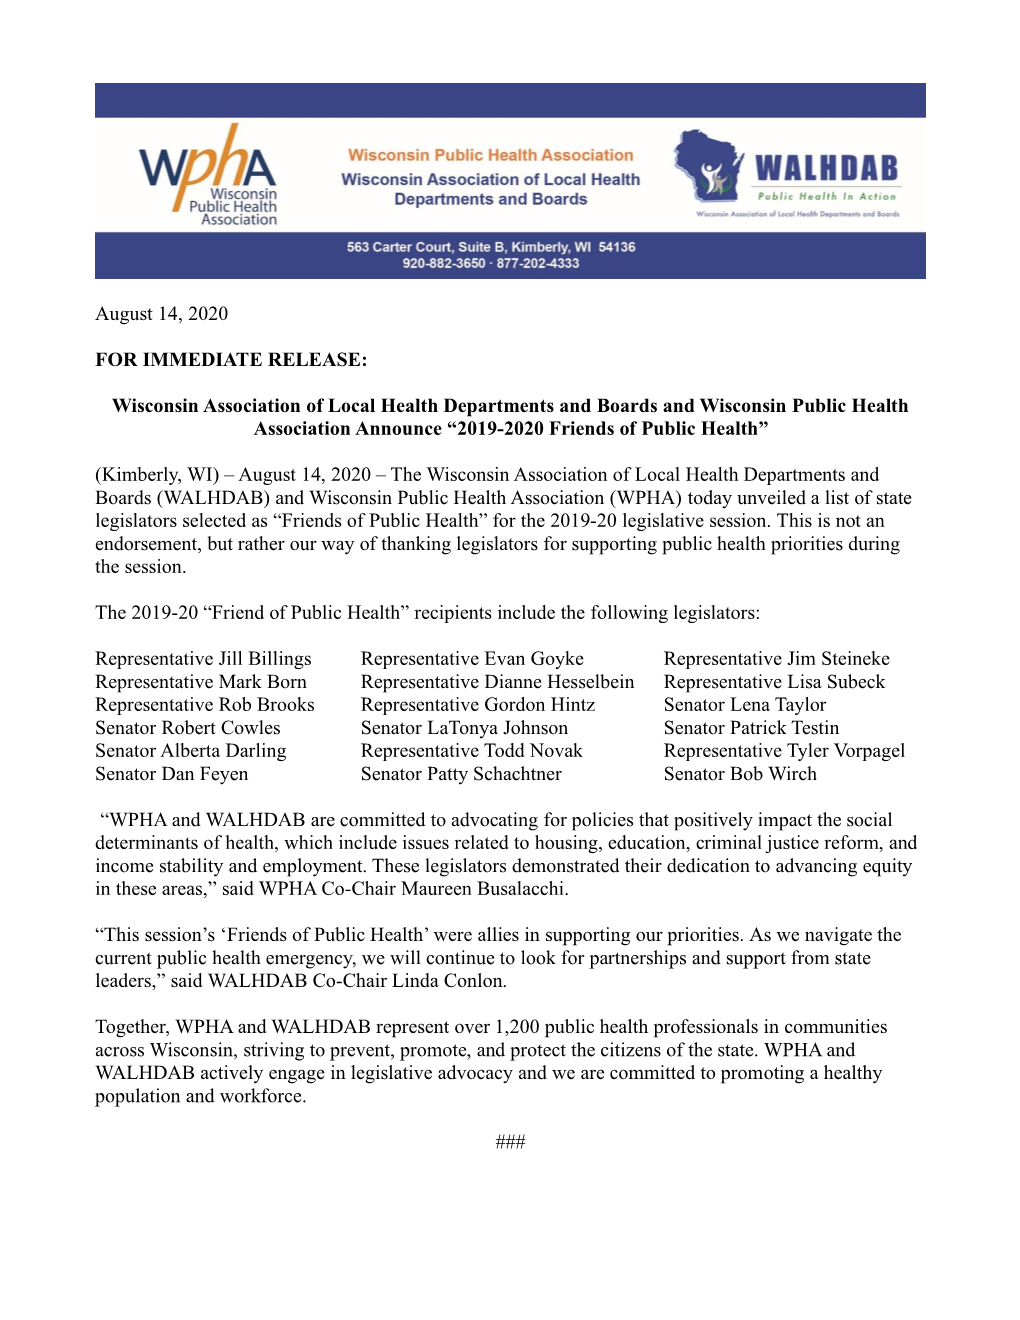 August 14, 2020 for IMMEDIATE RELEASE: Wisconsin Association of Local Health Departments and Boards and Wisconsin Public Health